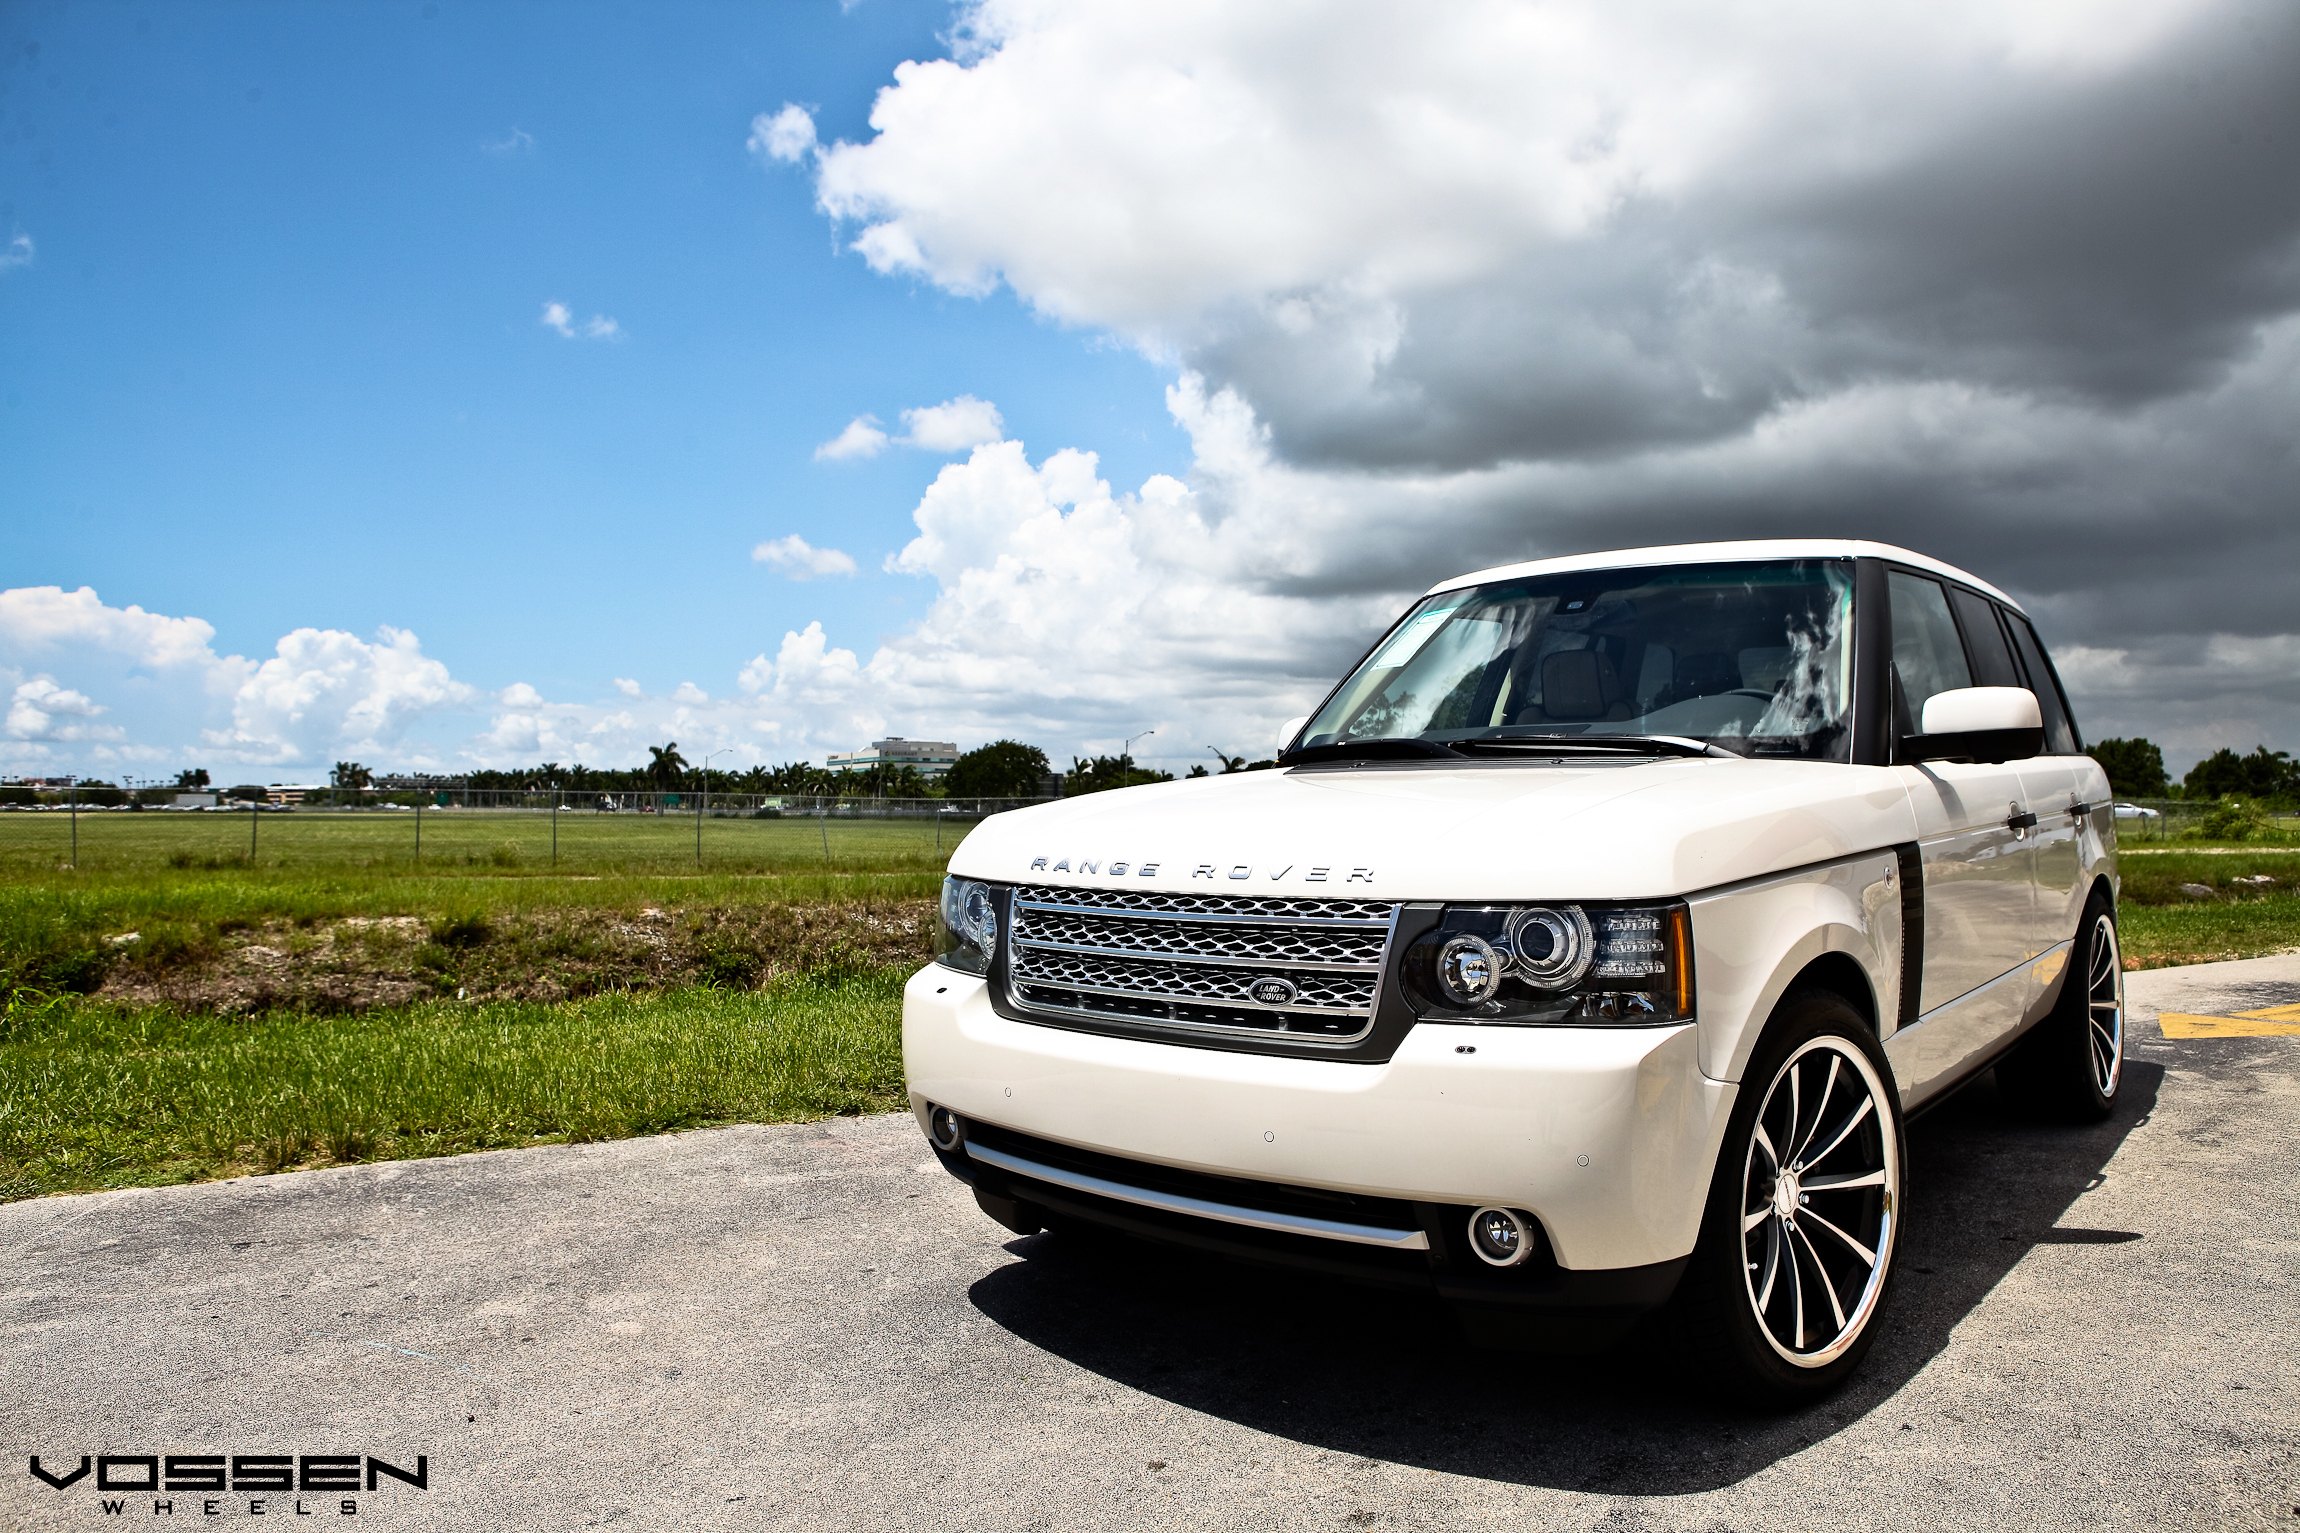 Front Bumper with Fog Lights on White Range Rover - Photo by Vossen